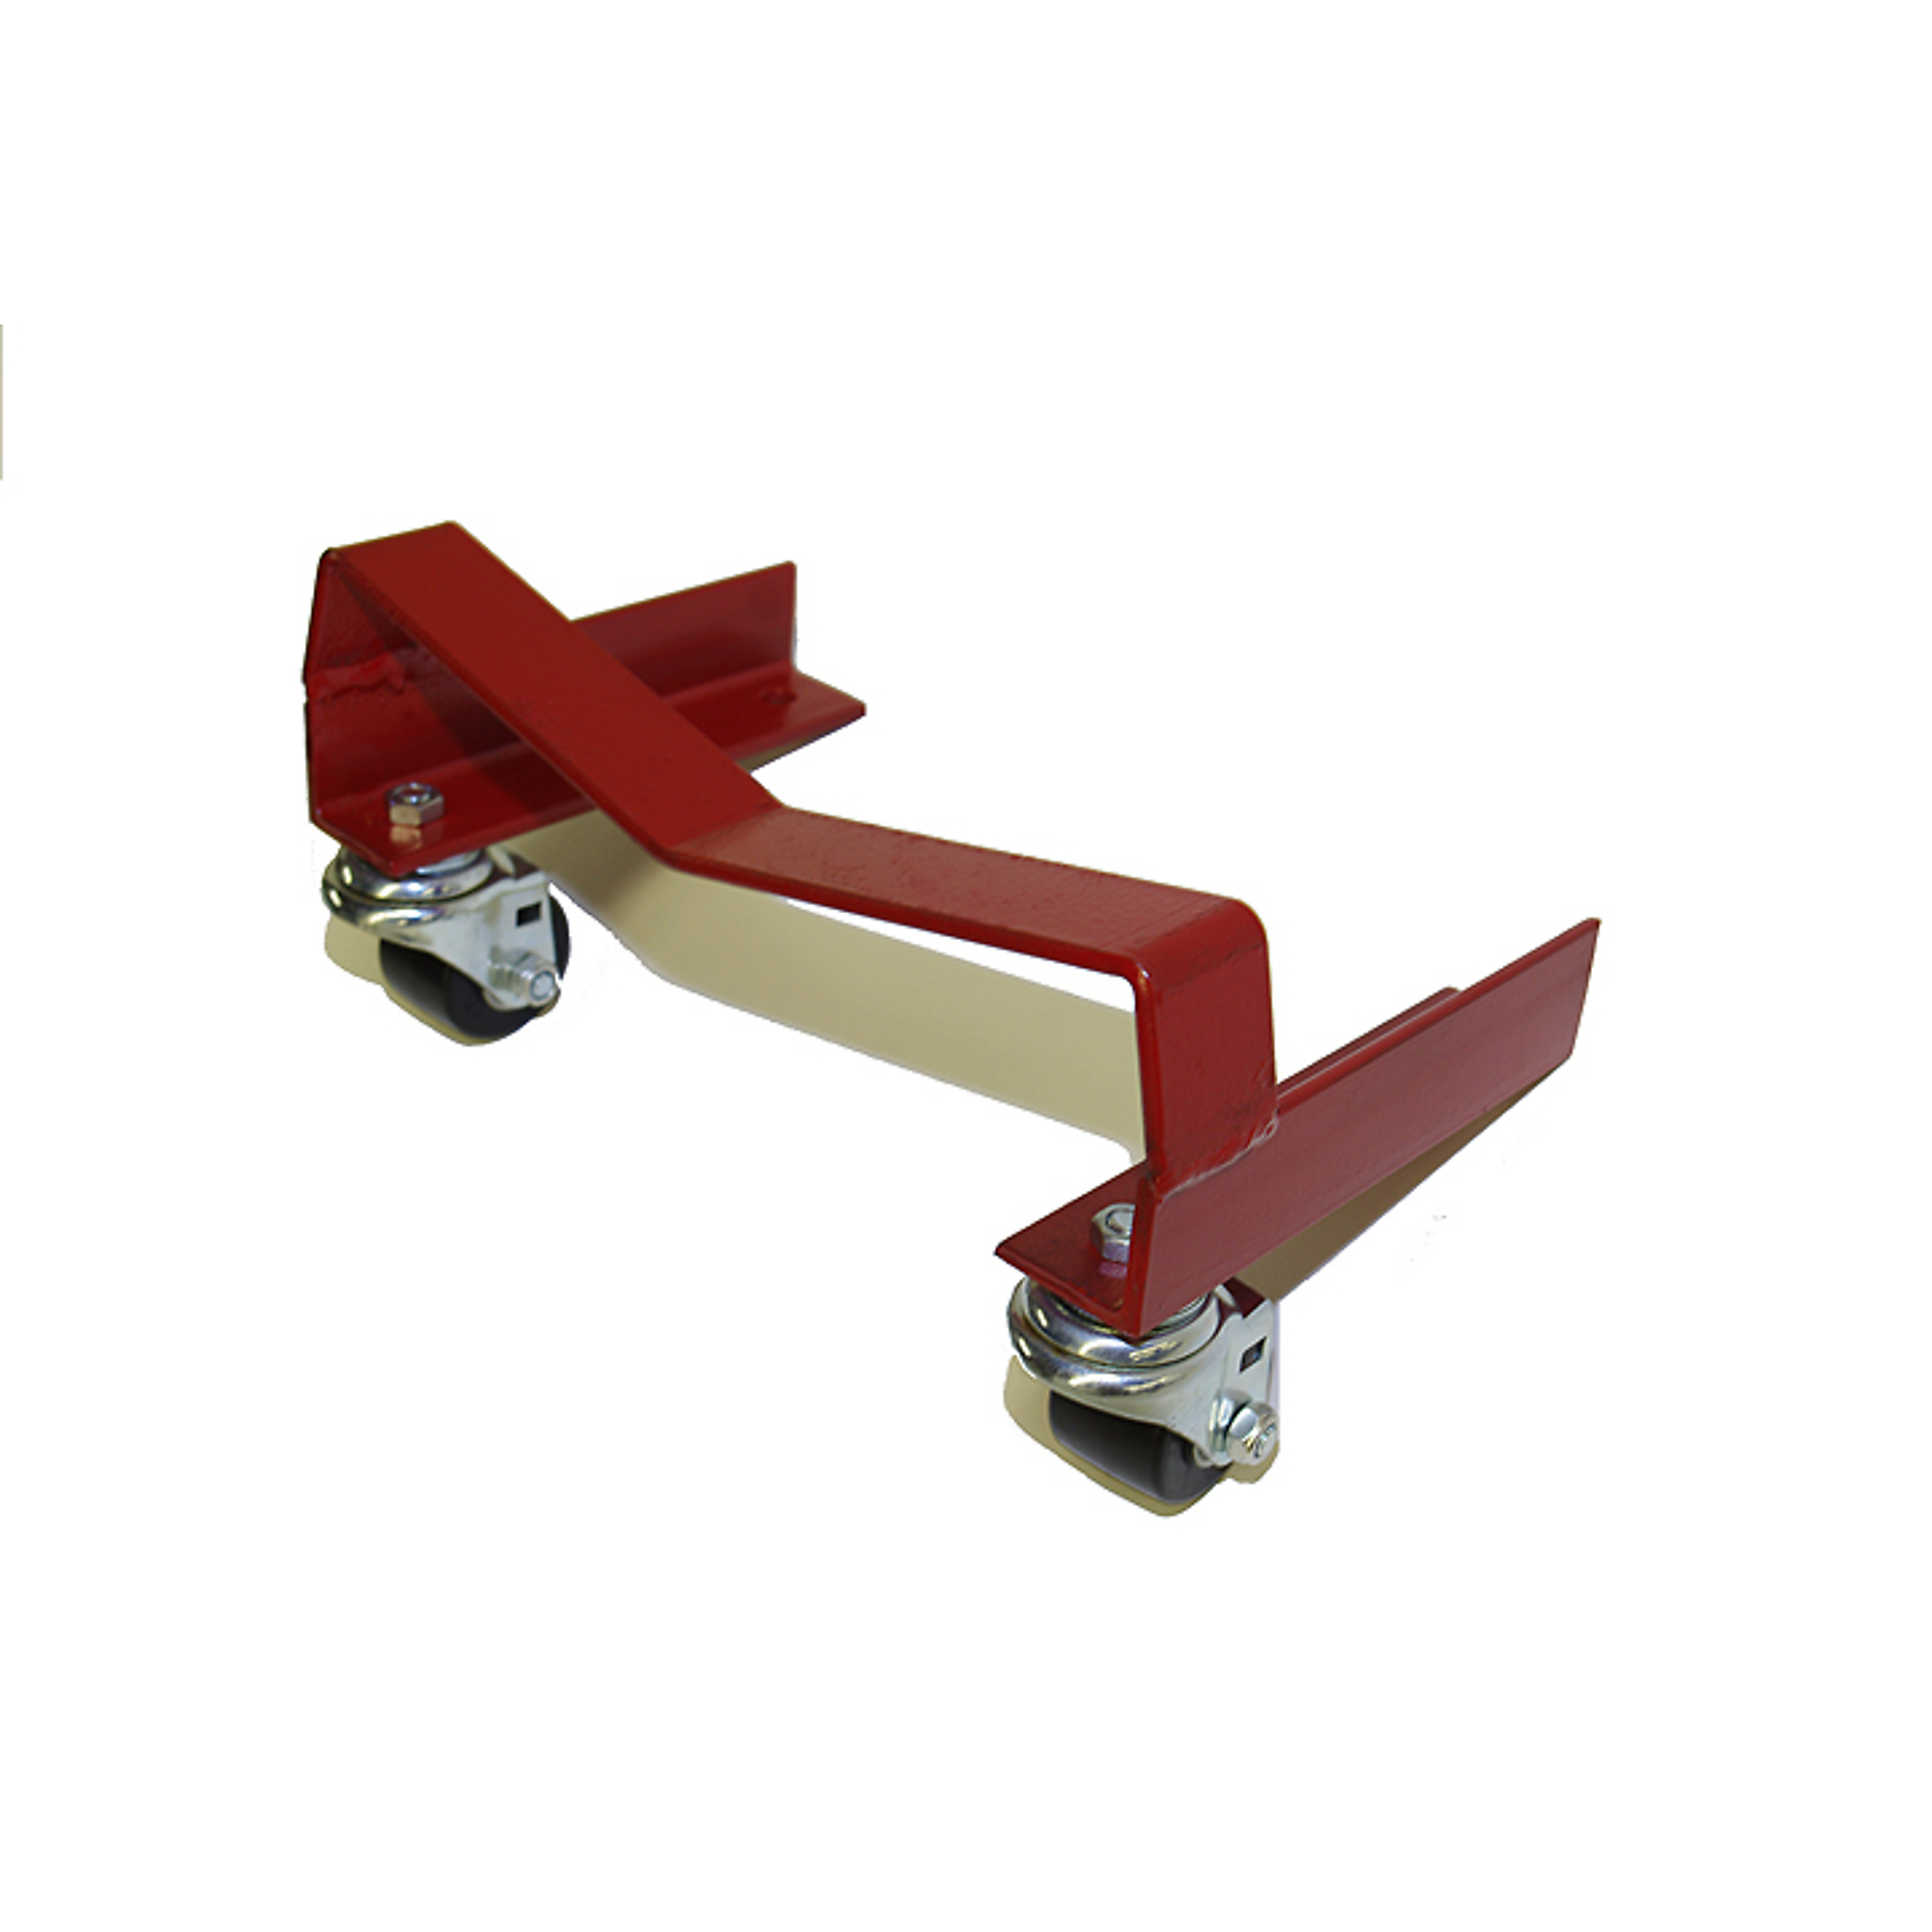 Merrick Auto Dolly, Wheel Dollies, Capacity 1250 lb, Material Steel, Included (qty.) 1 Model M998055